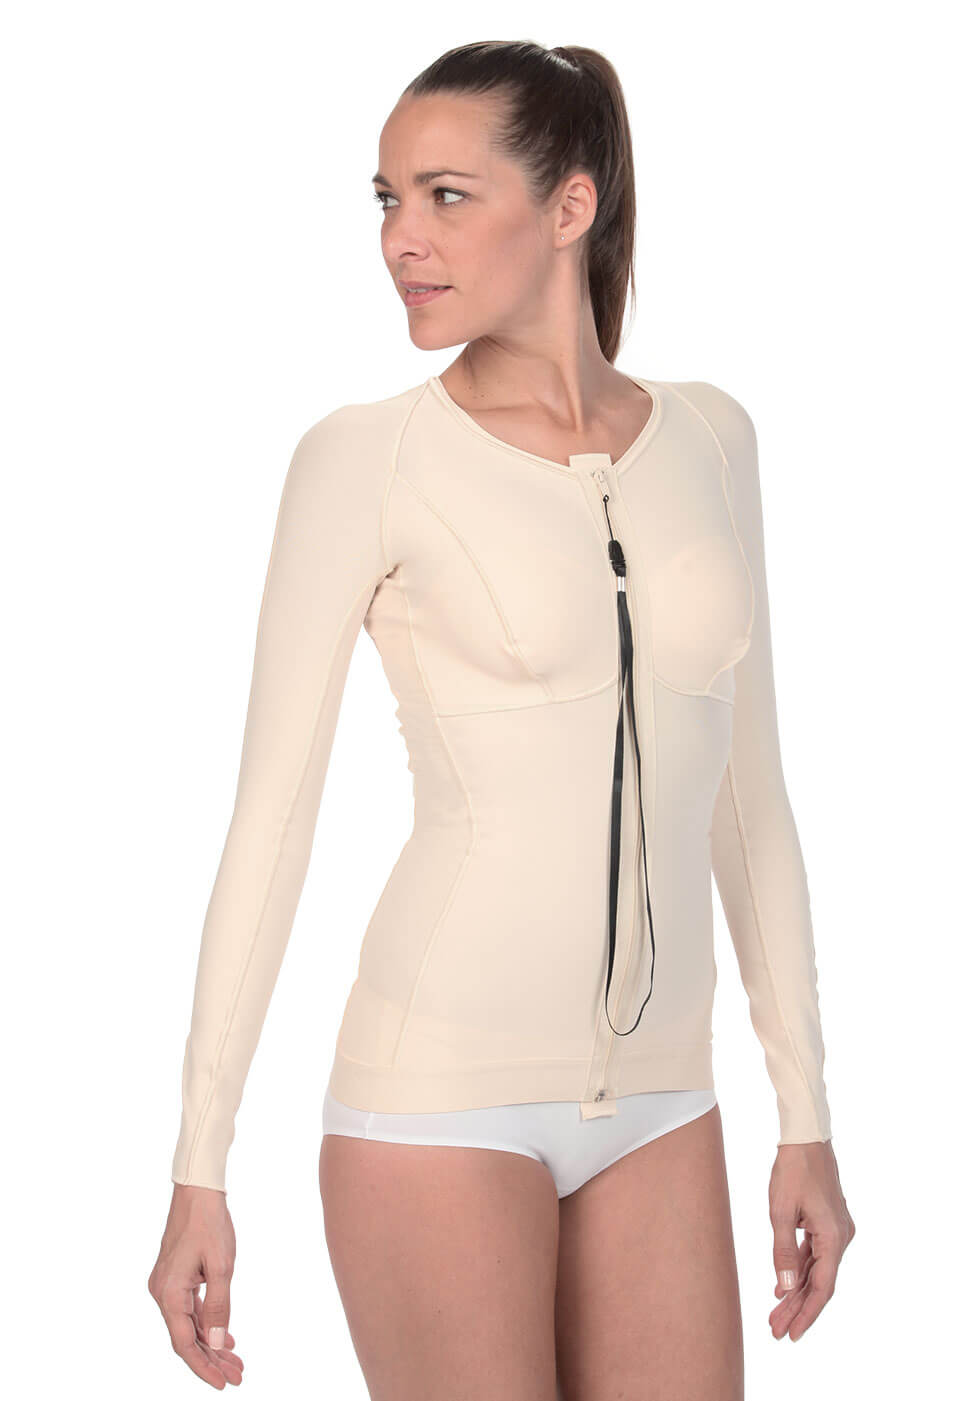 Compressive vest for patient with Ehlers Danlos syndrome - Euromi